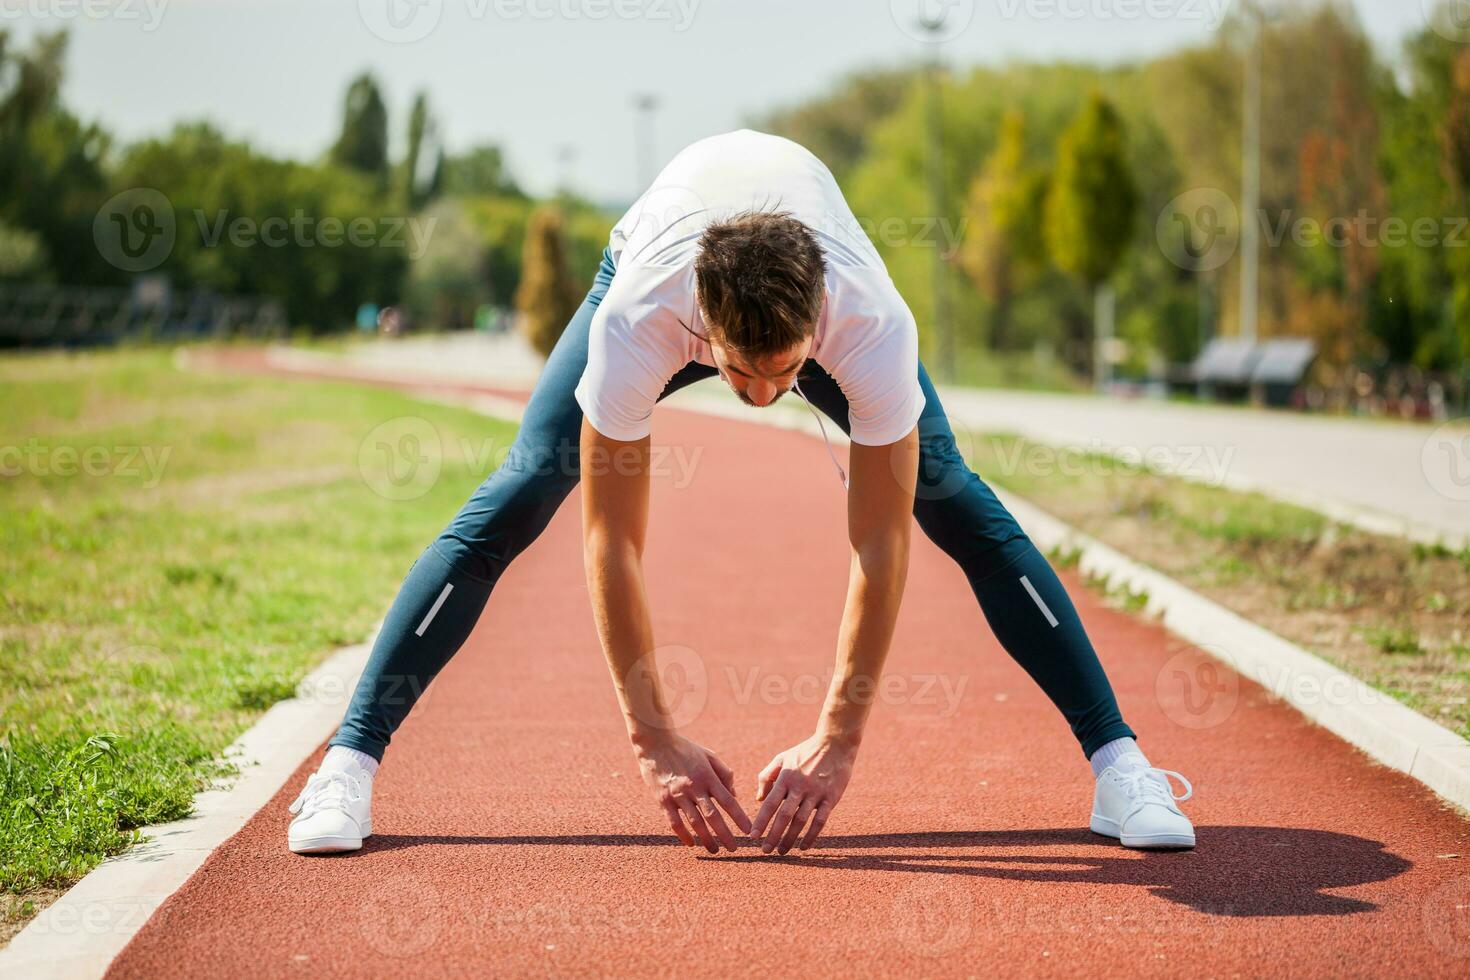 A man on a running track photo